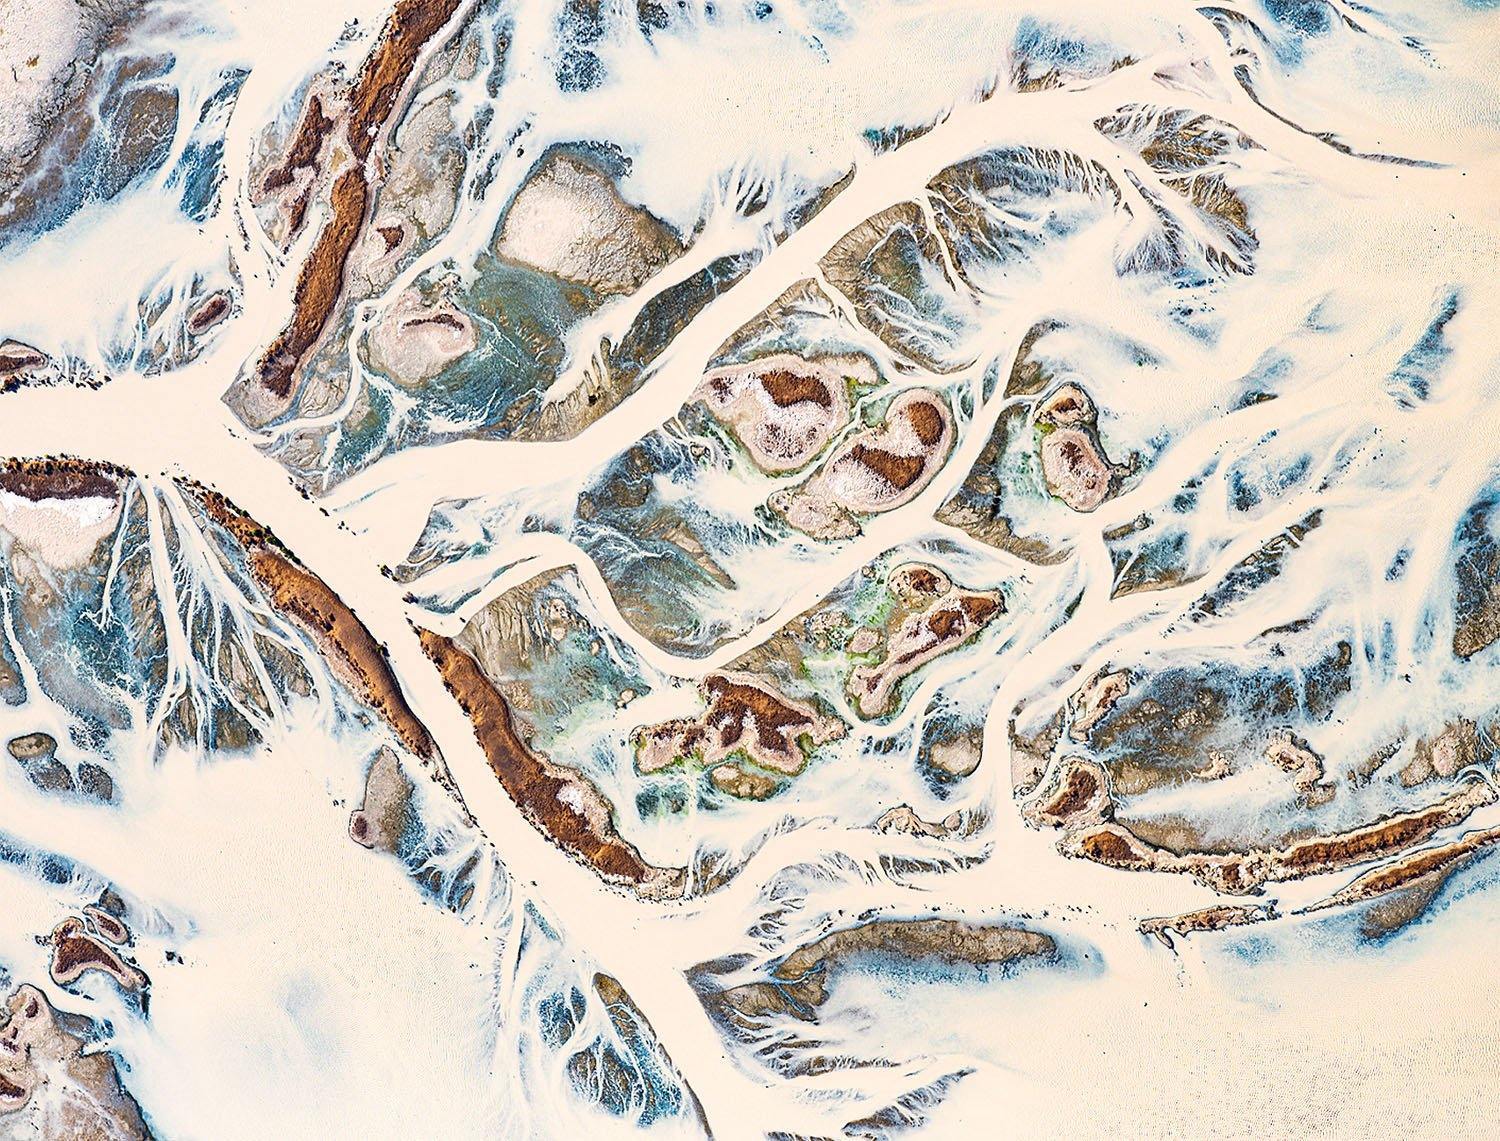 A snow desert with a lot of unclear curves and lines, forming a little green and brown colors on the shapes, Desert Rains